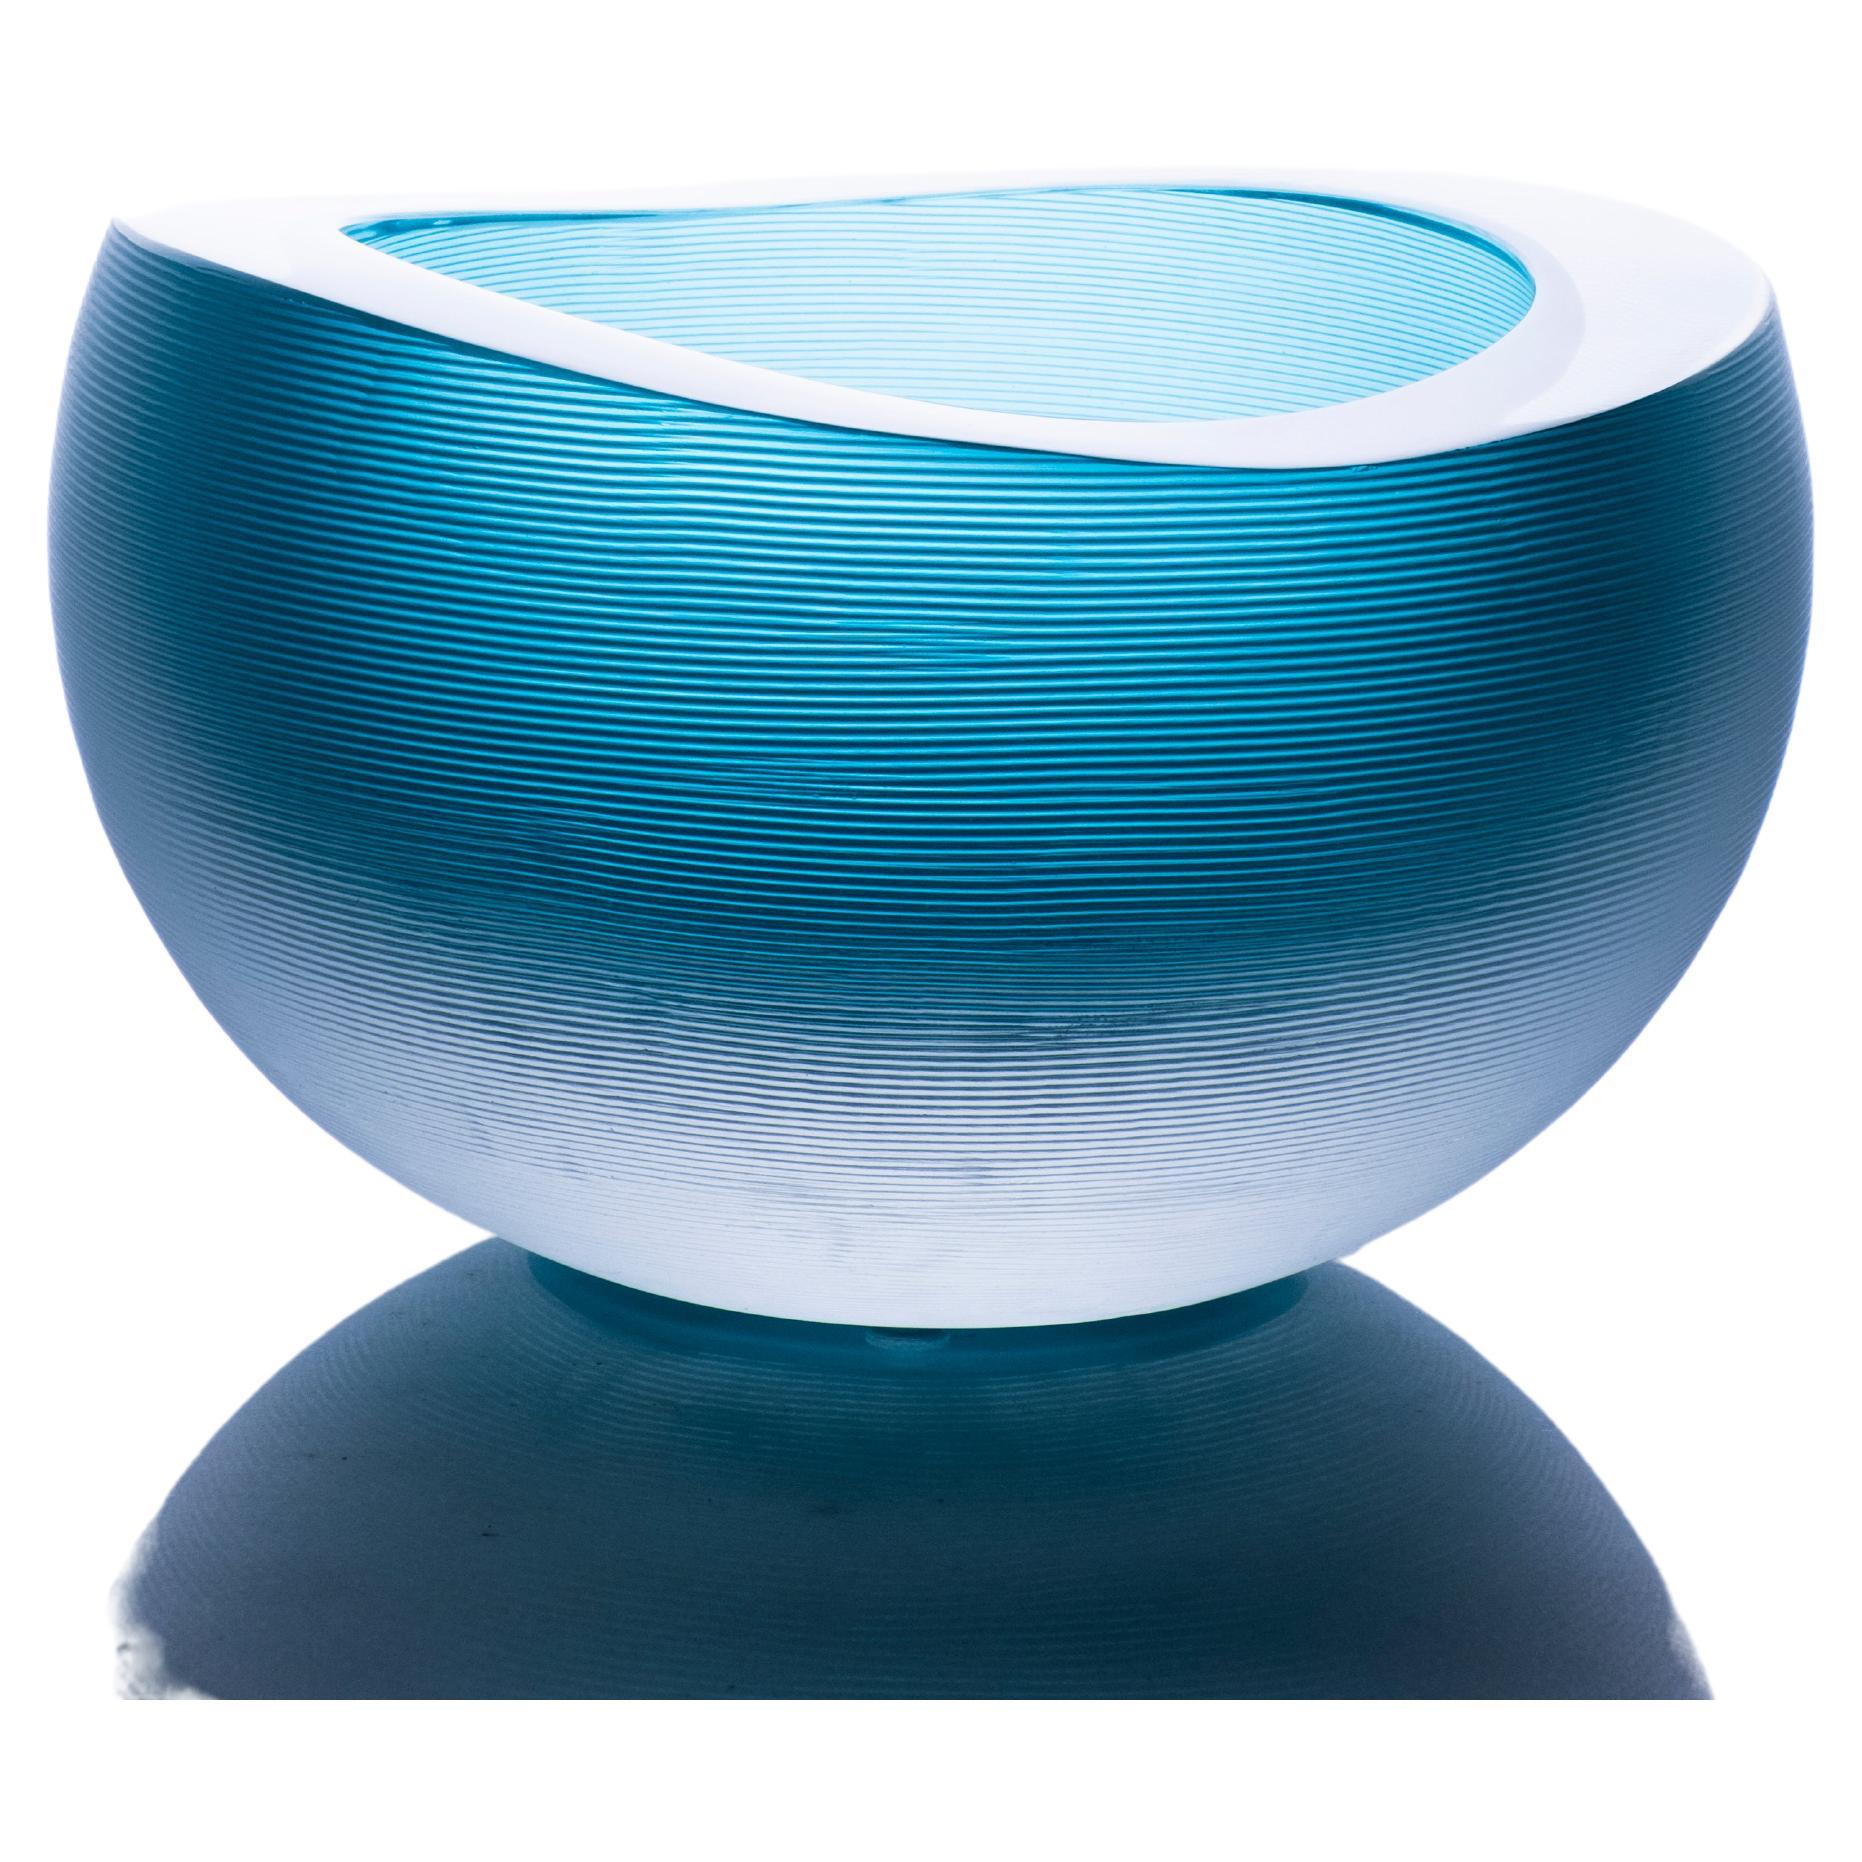 Incisioni Linae Small Vase by Purho